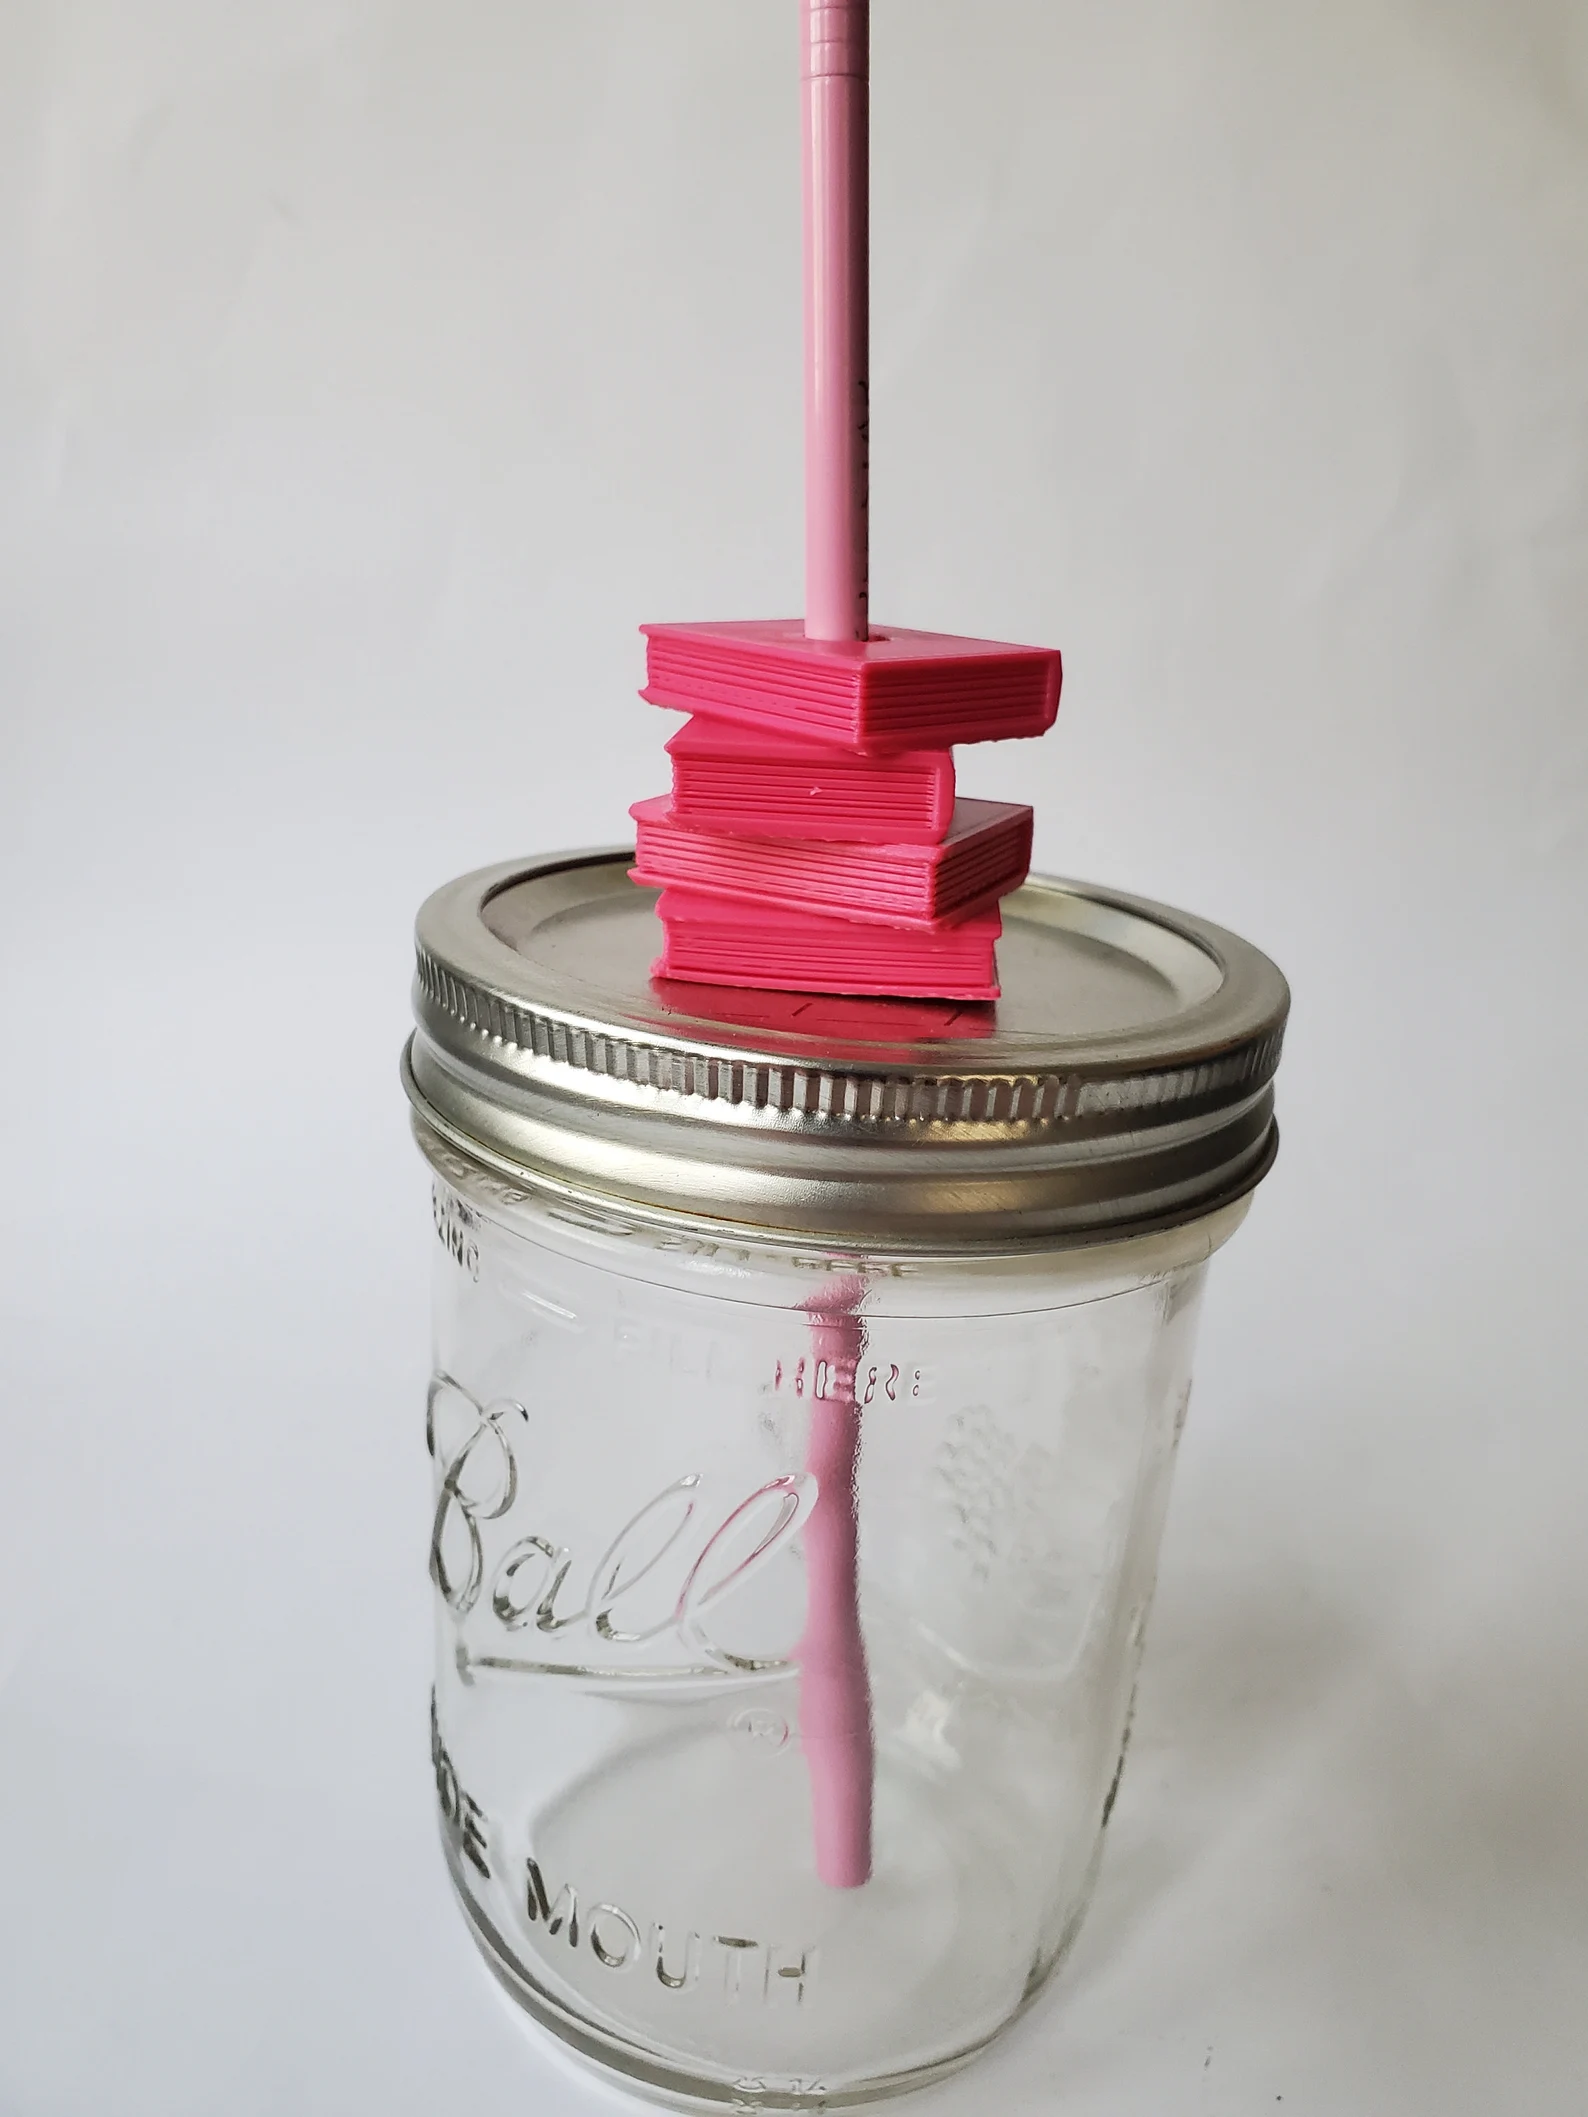 A mason jar cup with a lid, pink straw, and a straw topper in the shape of a stack of books.